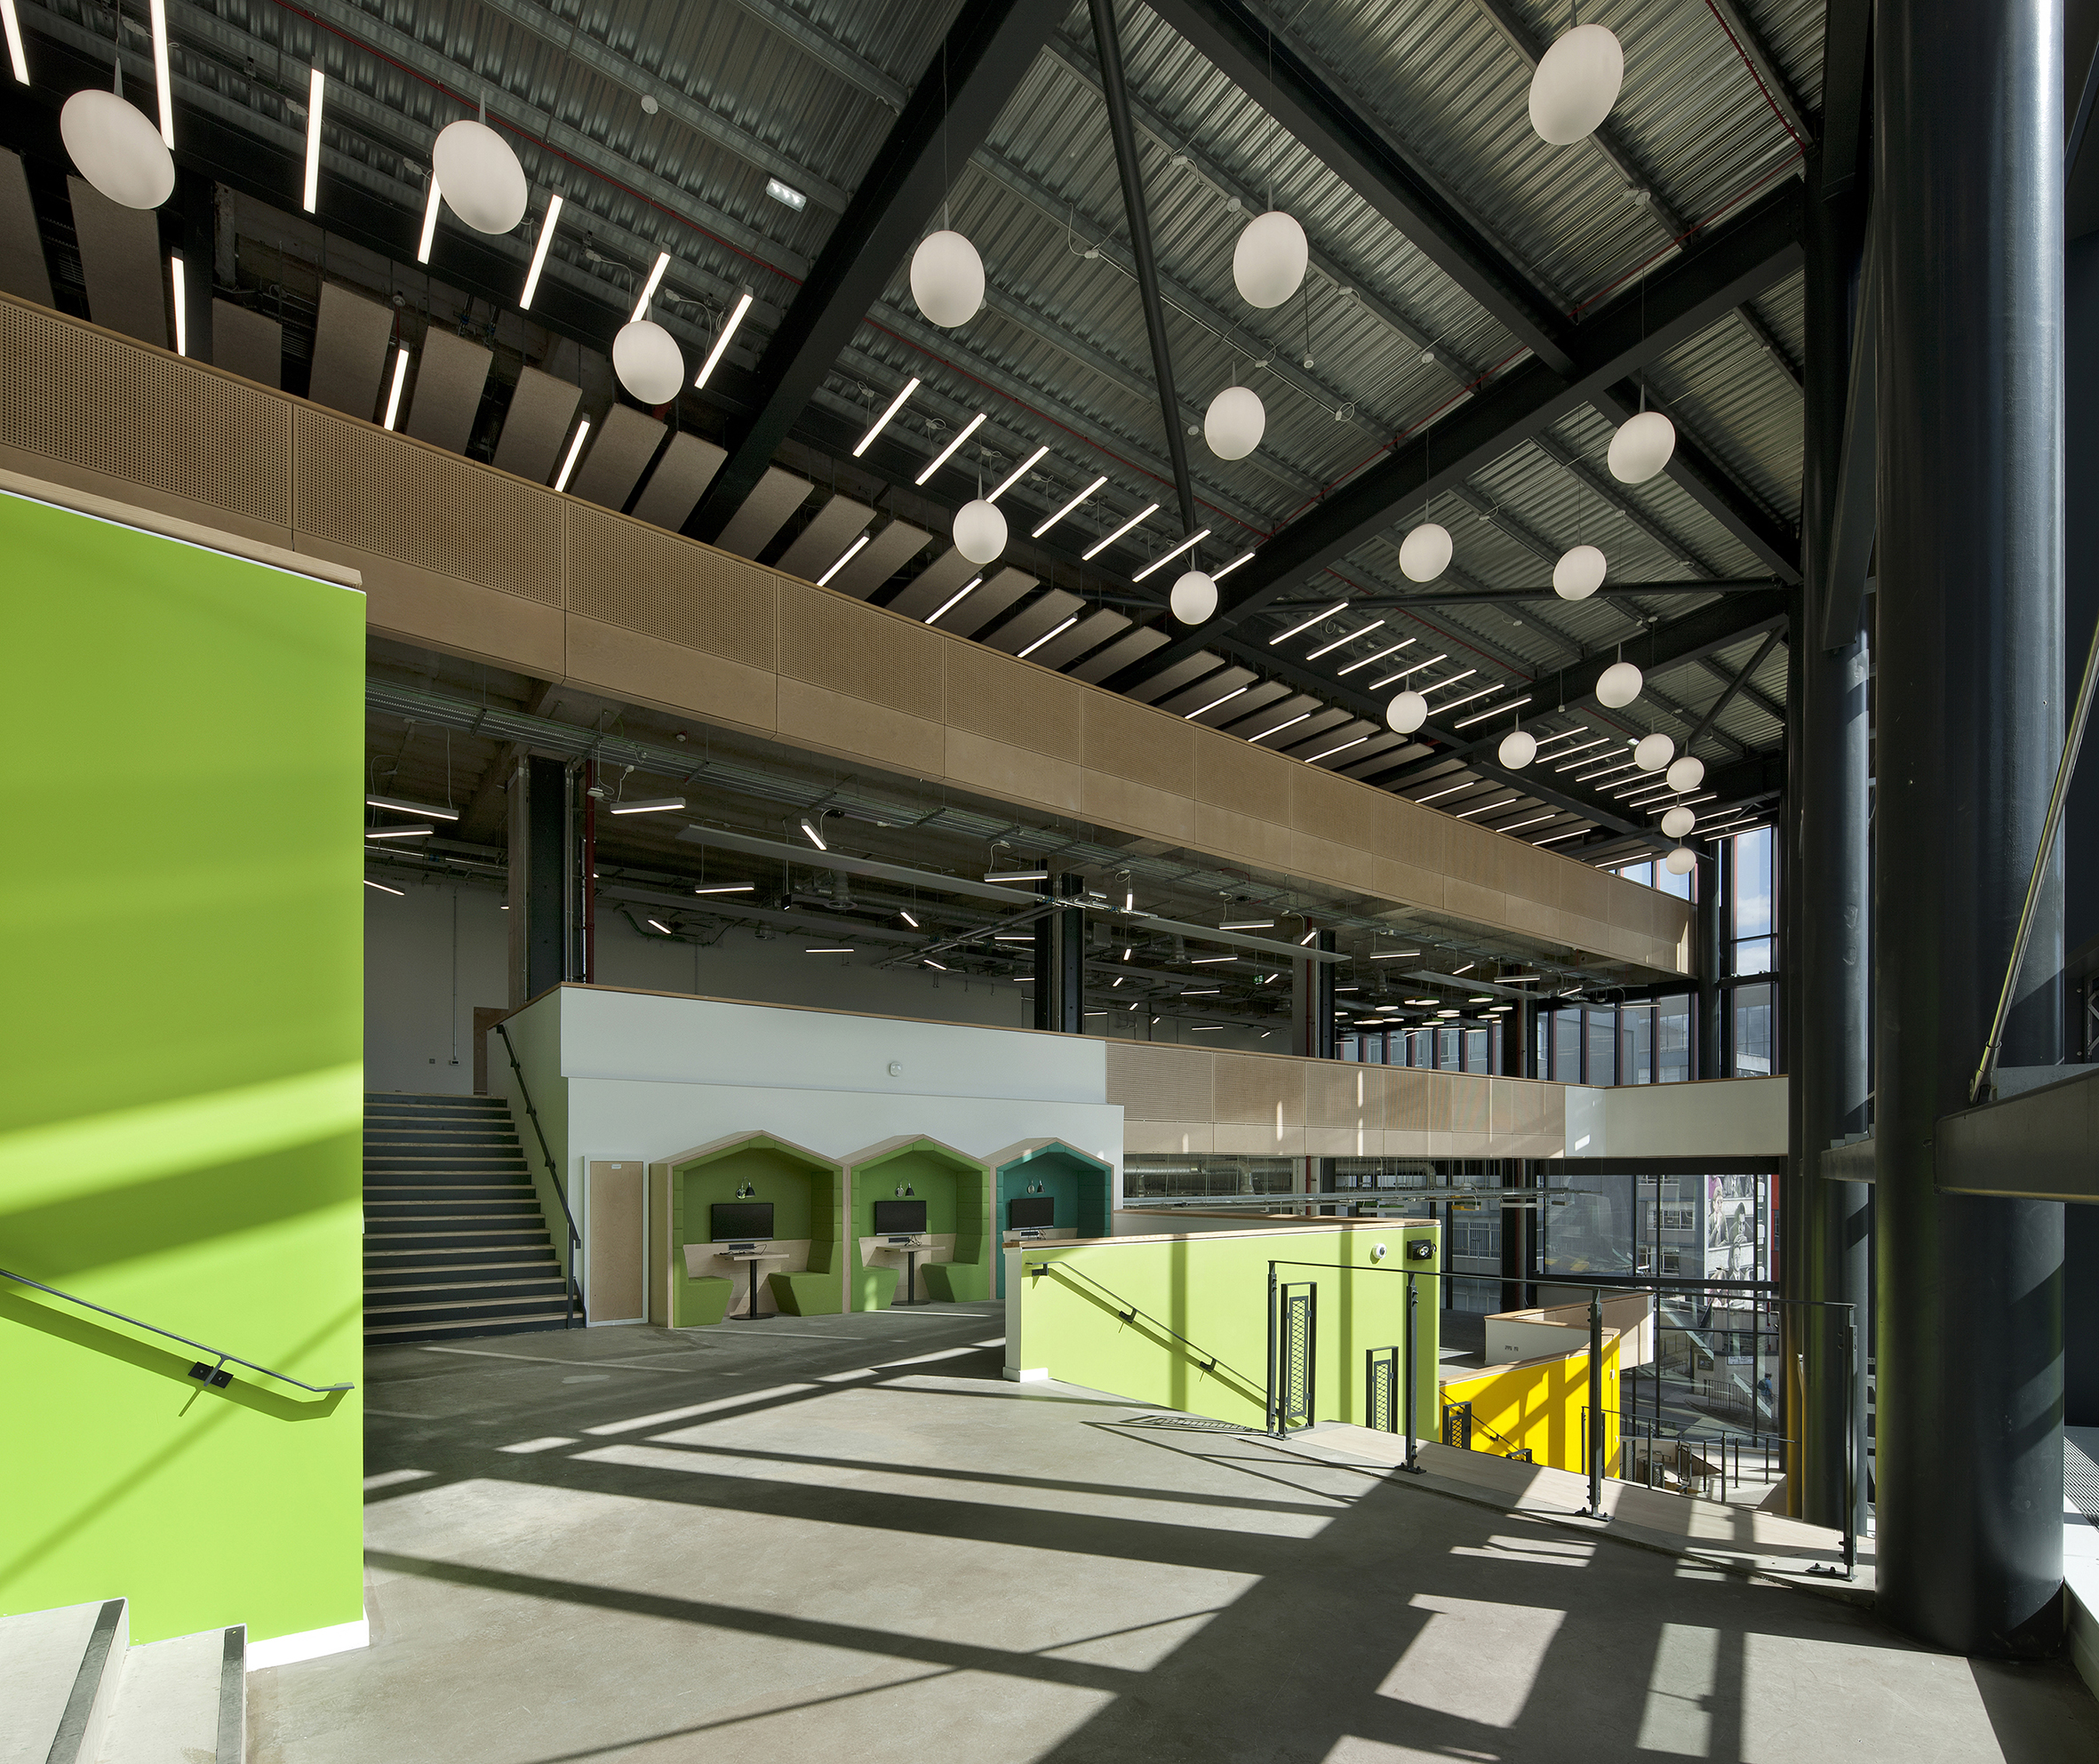 BDP picks up retrofit award for University of Strathclyde project